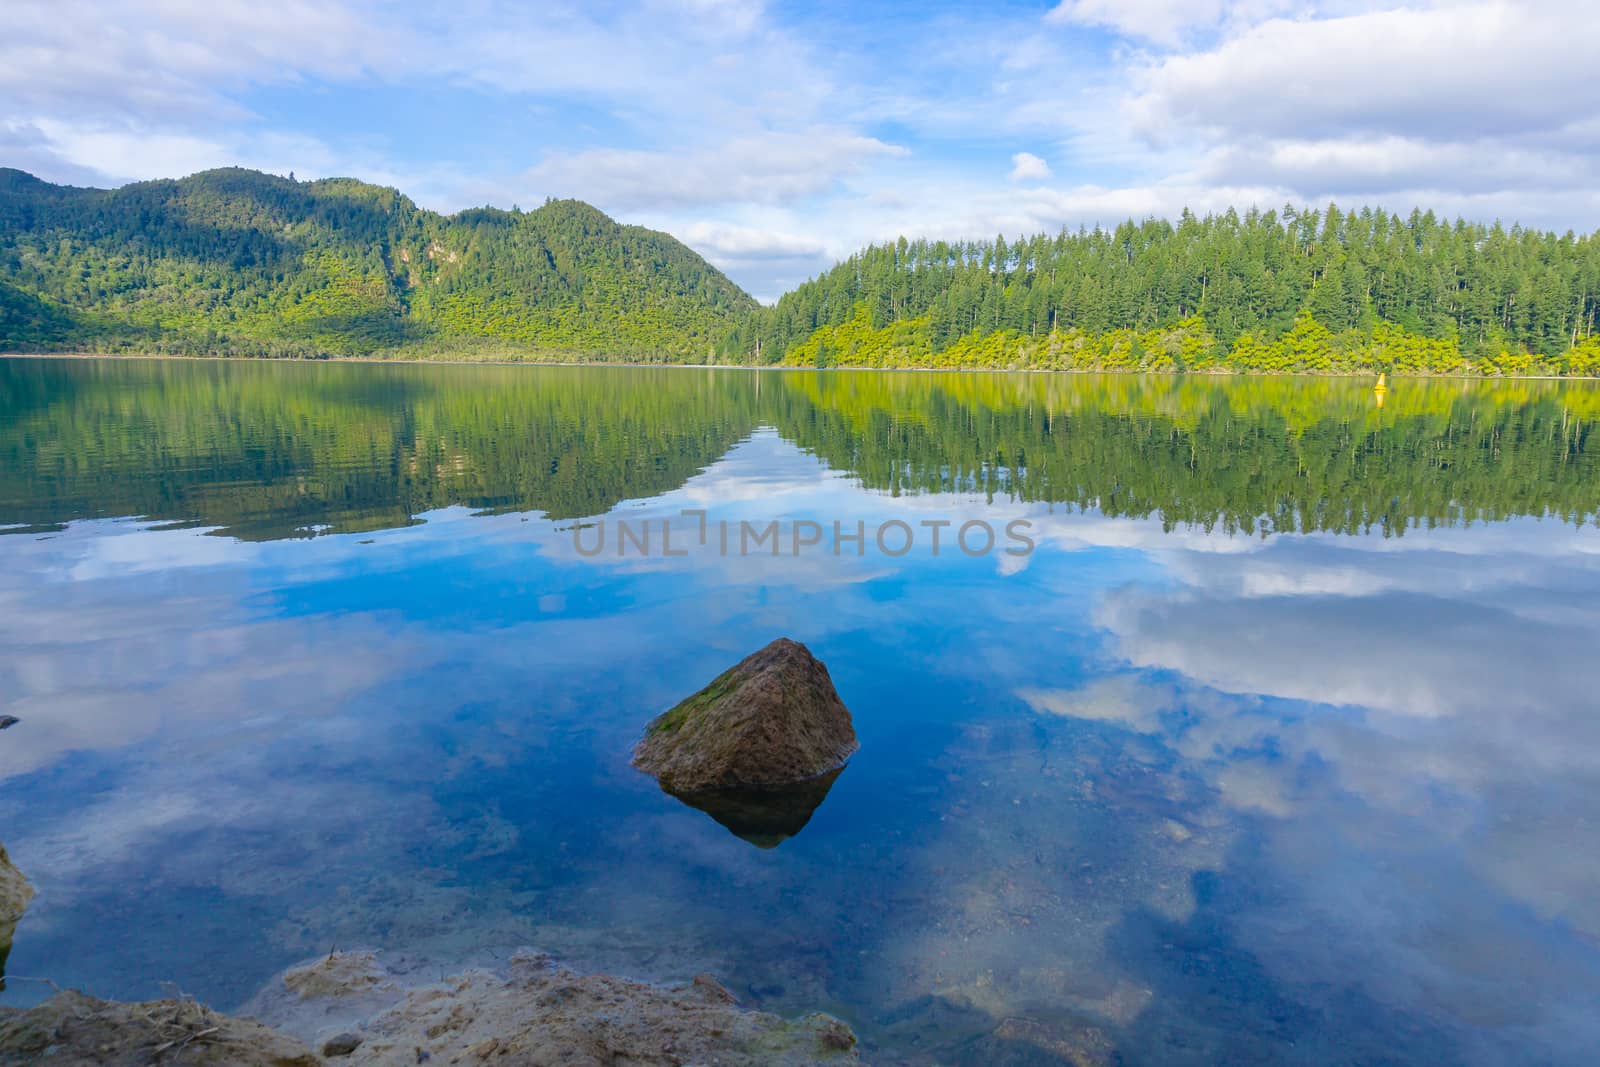 View across calm Blue Lake to ferns and trees on other side with sky and lake edge reflected in calm water, Rotorua New Zealand.